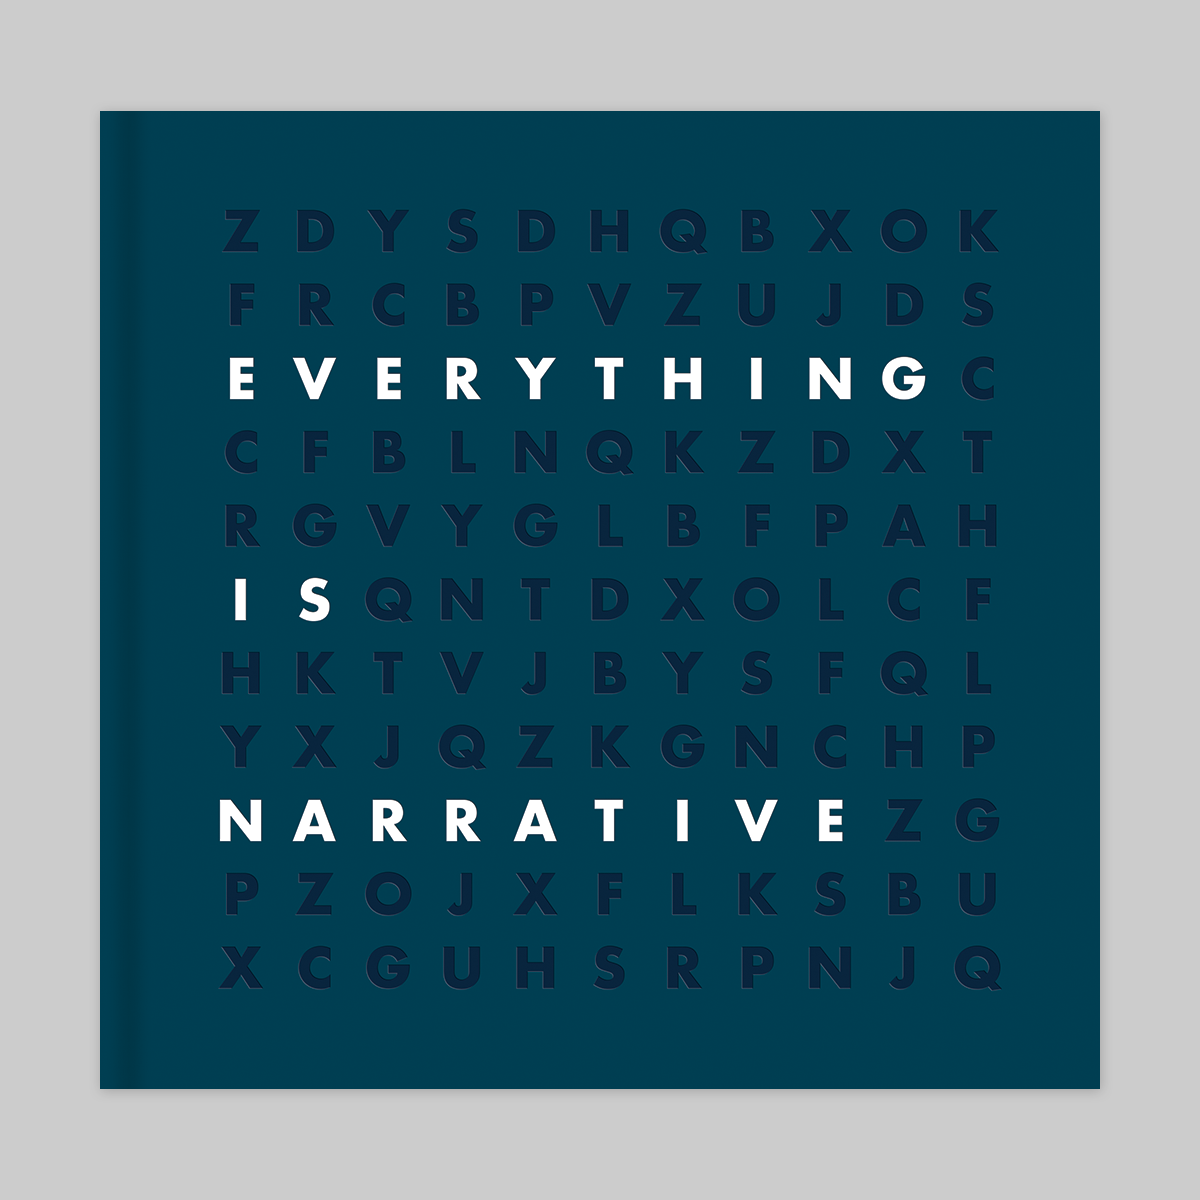 Everything Is Narrative - Published by Subjective Objective